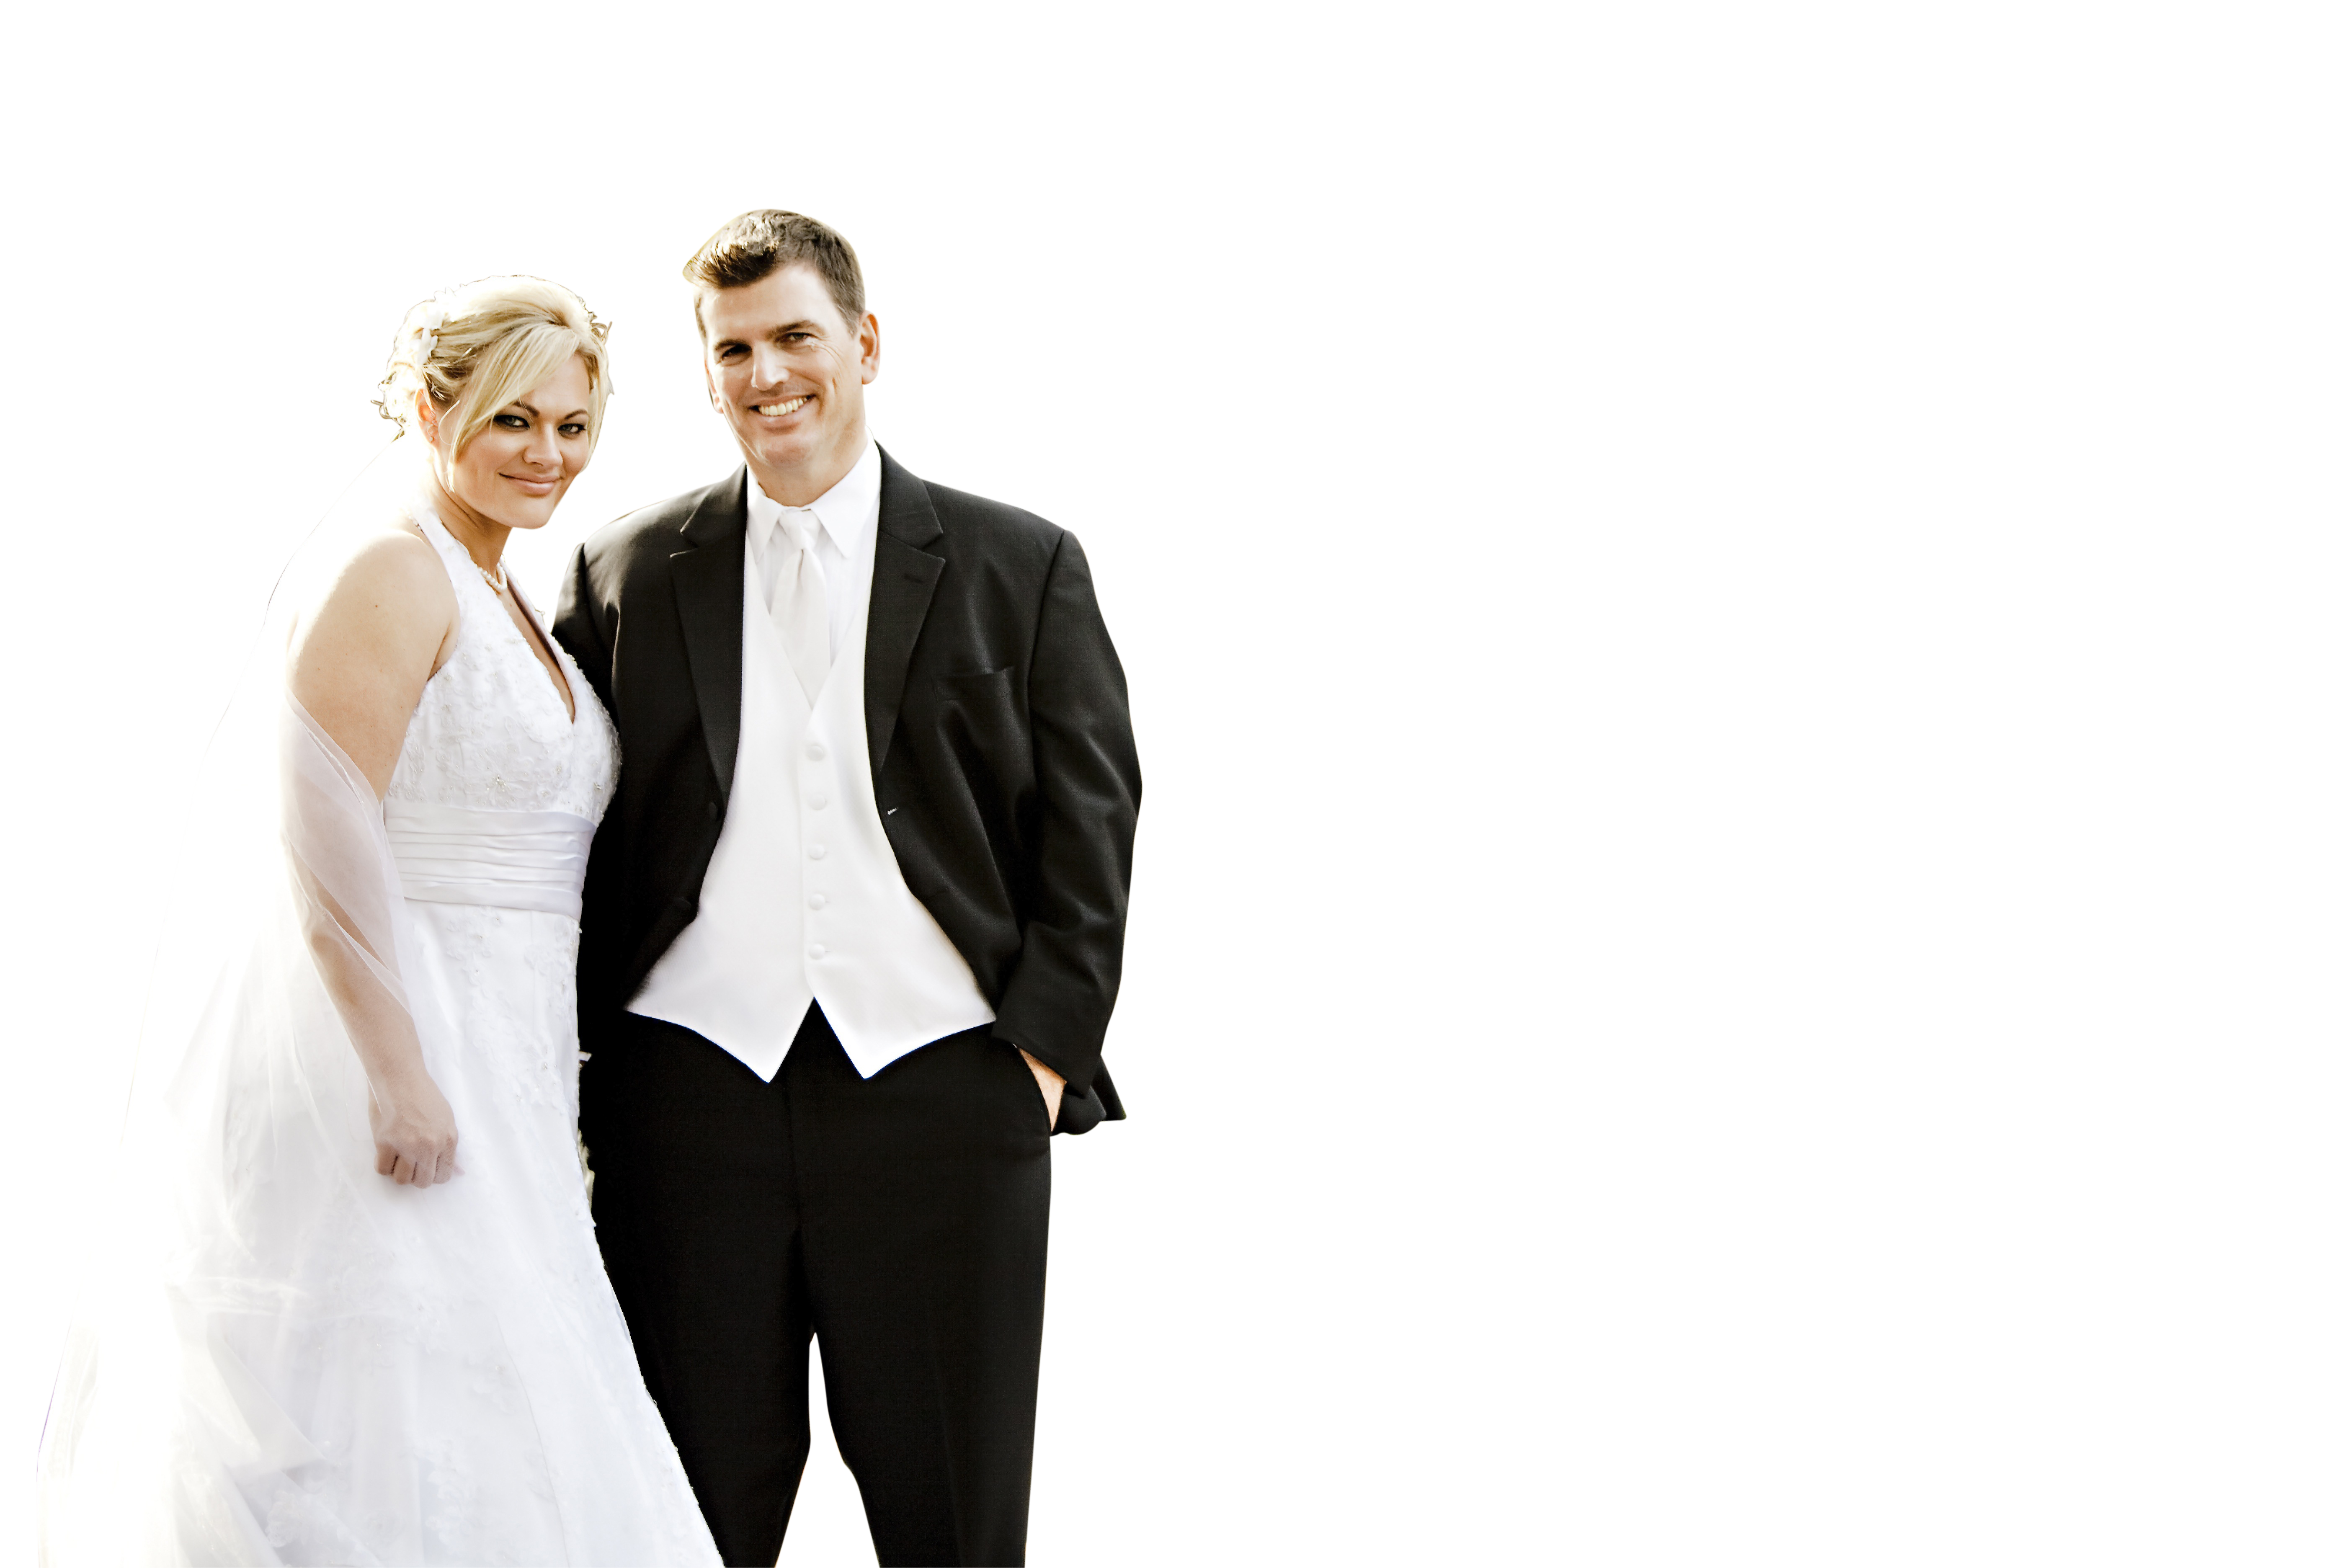 A Man And Woman In A White Dress And Tuxedo